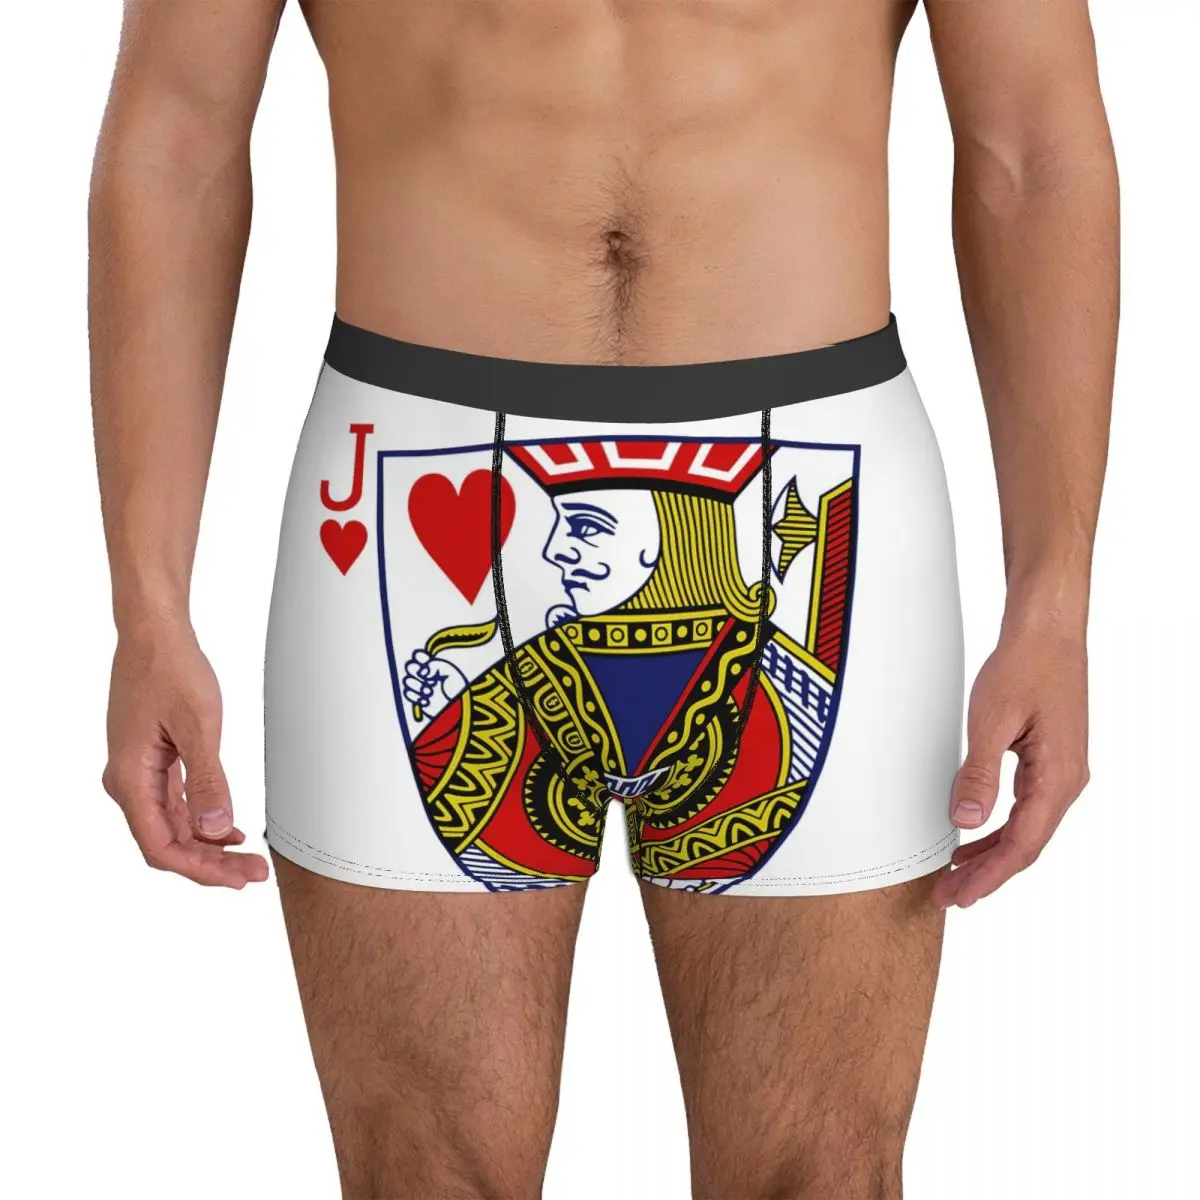 Jack Of Hearts Playing Card Underpants Breathbale Panties Male Underwear Print Shorts Boxer Briefs